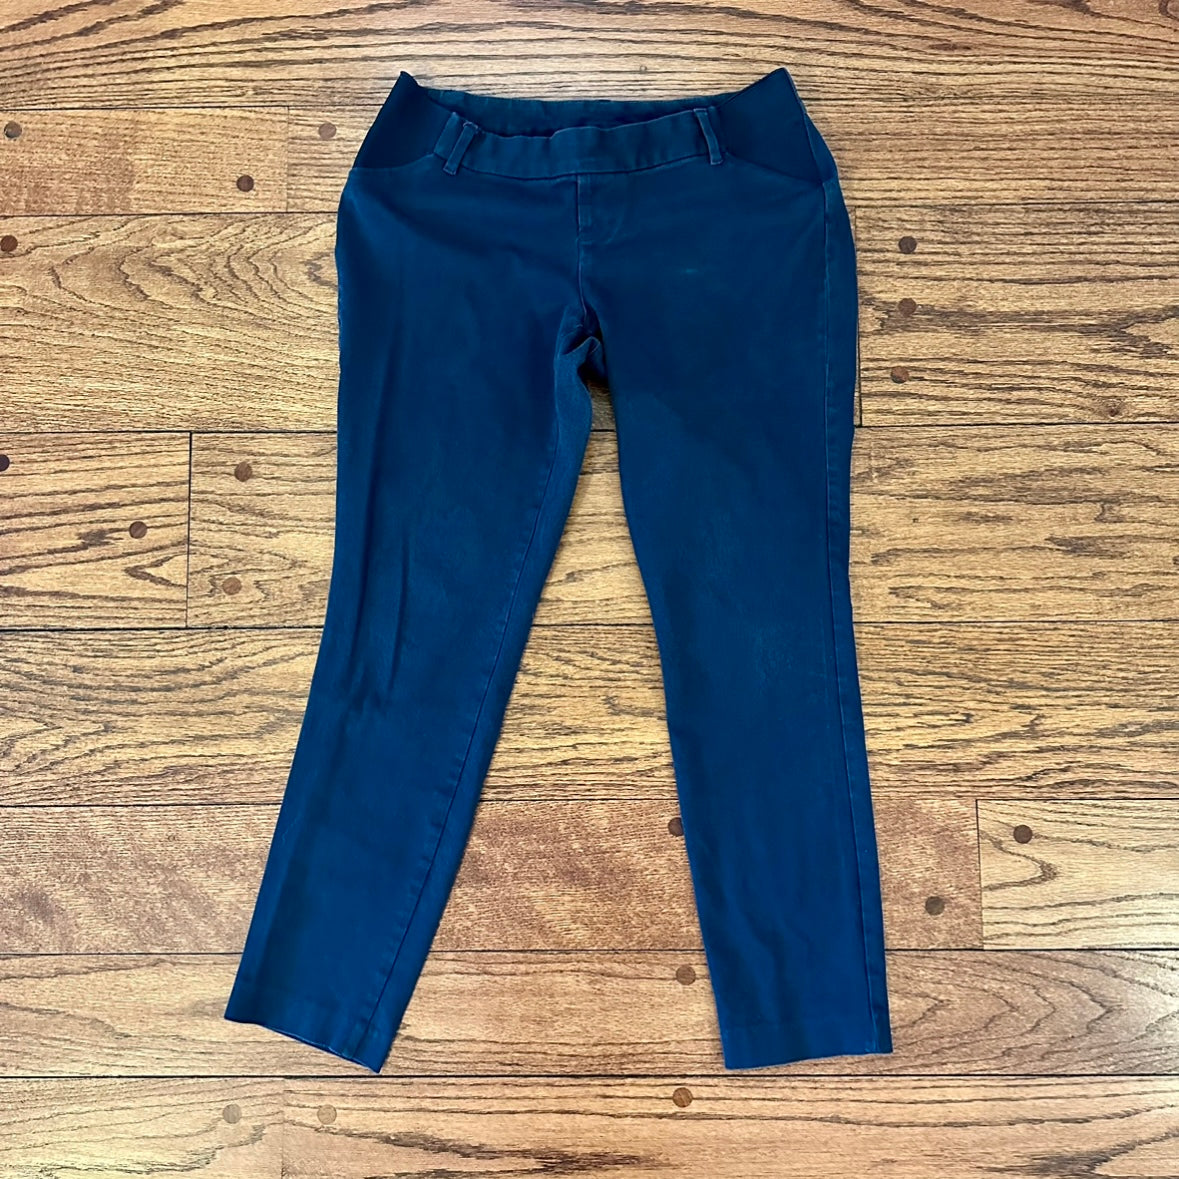 Women's Old Navy Maternity Navy (side panel) Cropped Pants - size 4